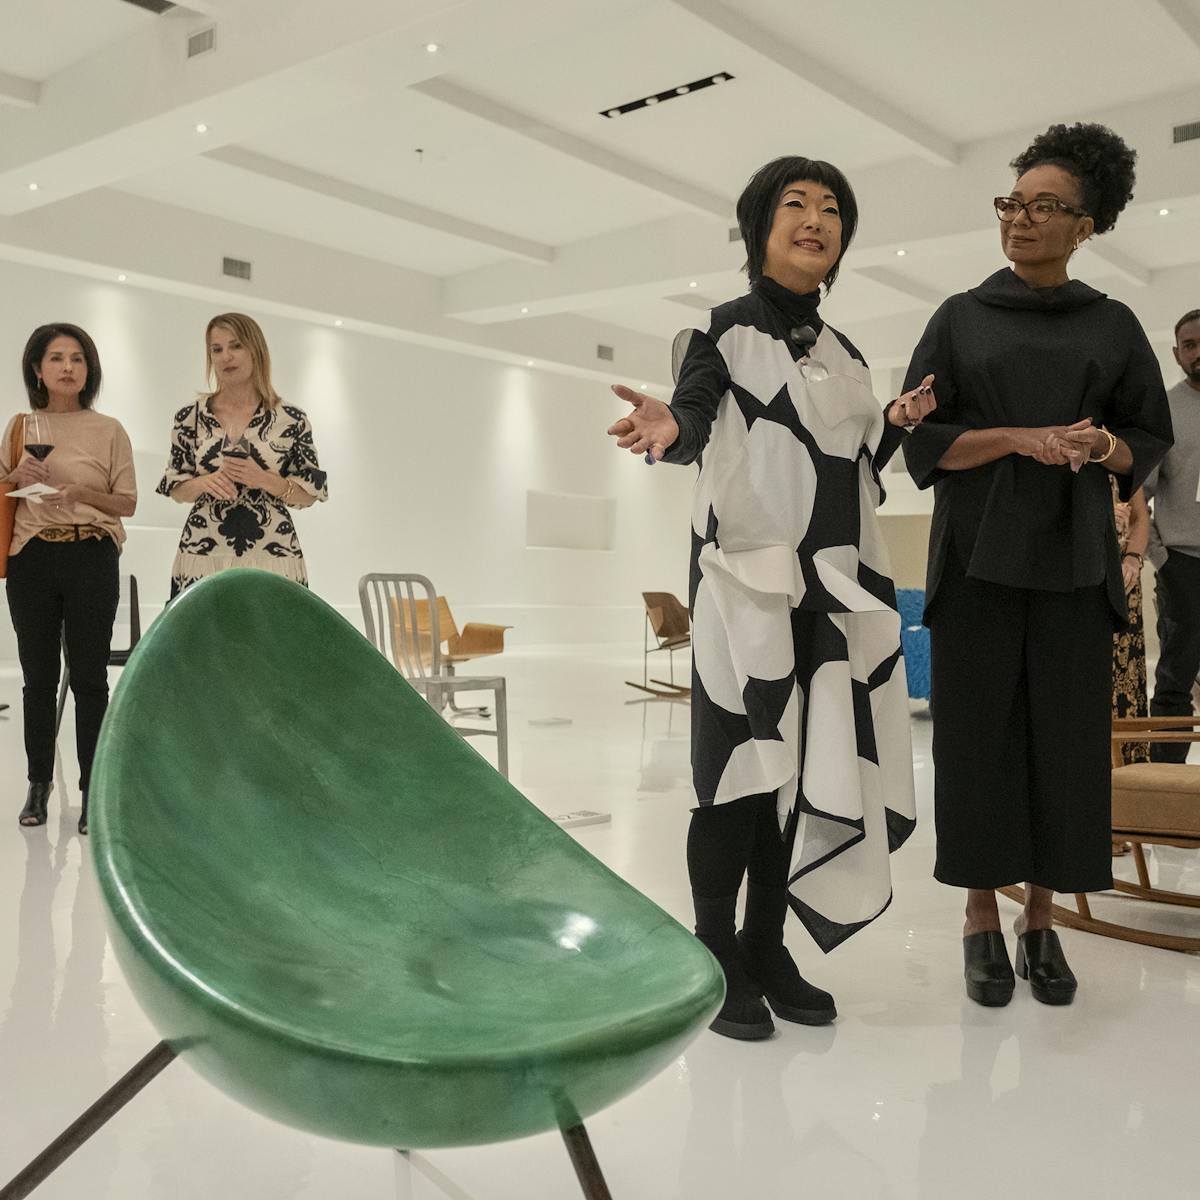 Fumi (Patti Yasutake) talks to a crowd of people about the green Tamago chair, which sits threateningly in the foreground of this shot.  